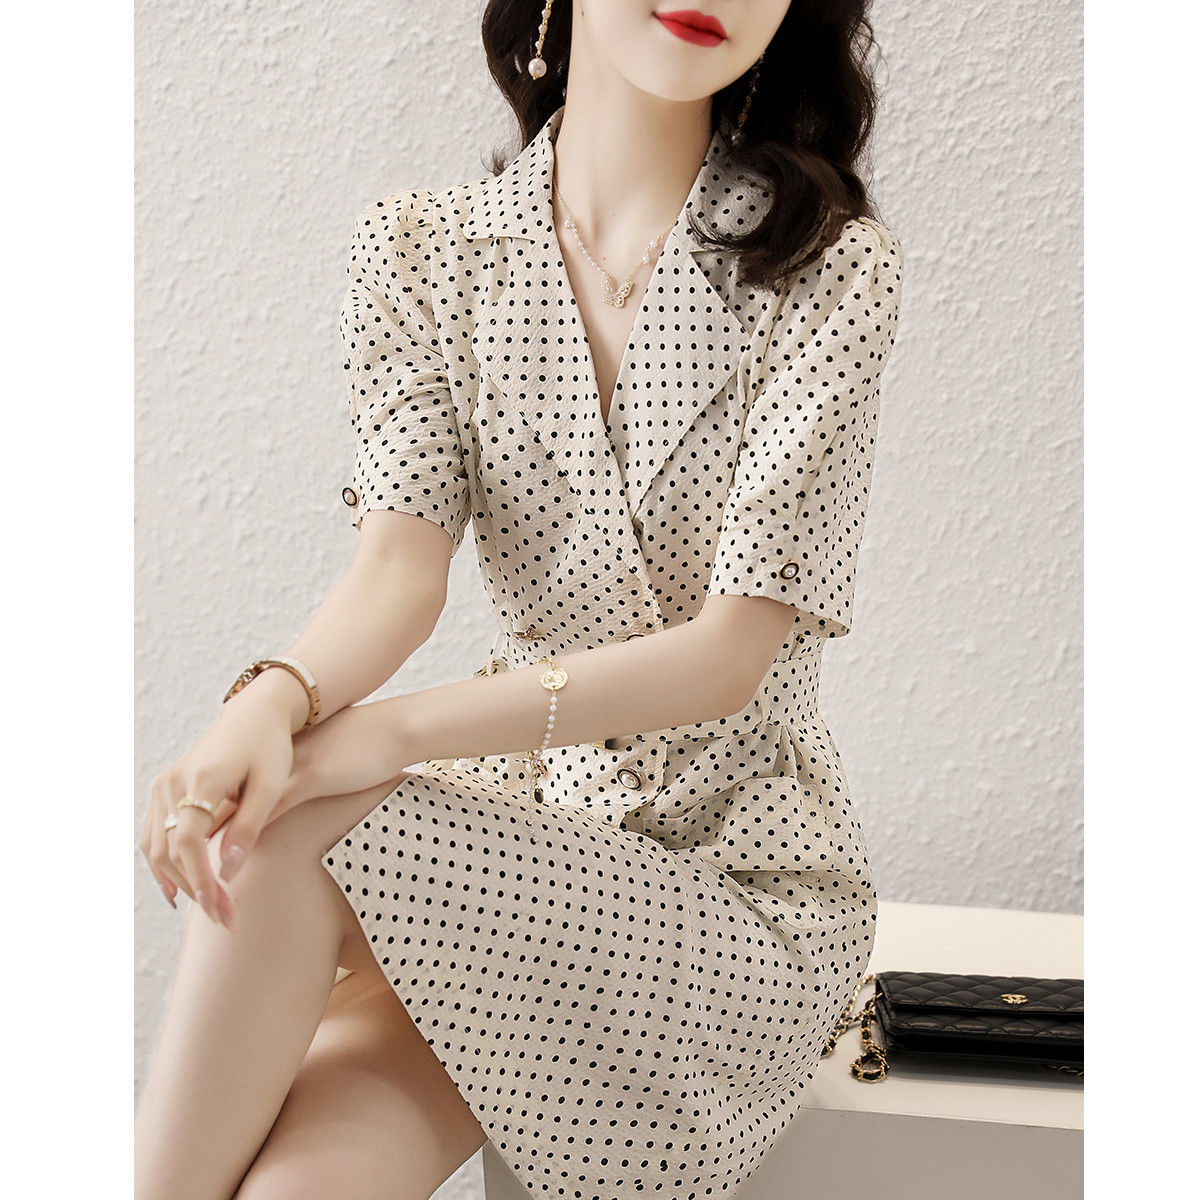 Pinched waist dress loose business suit for women